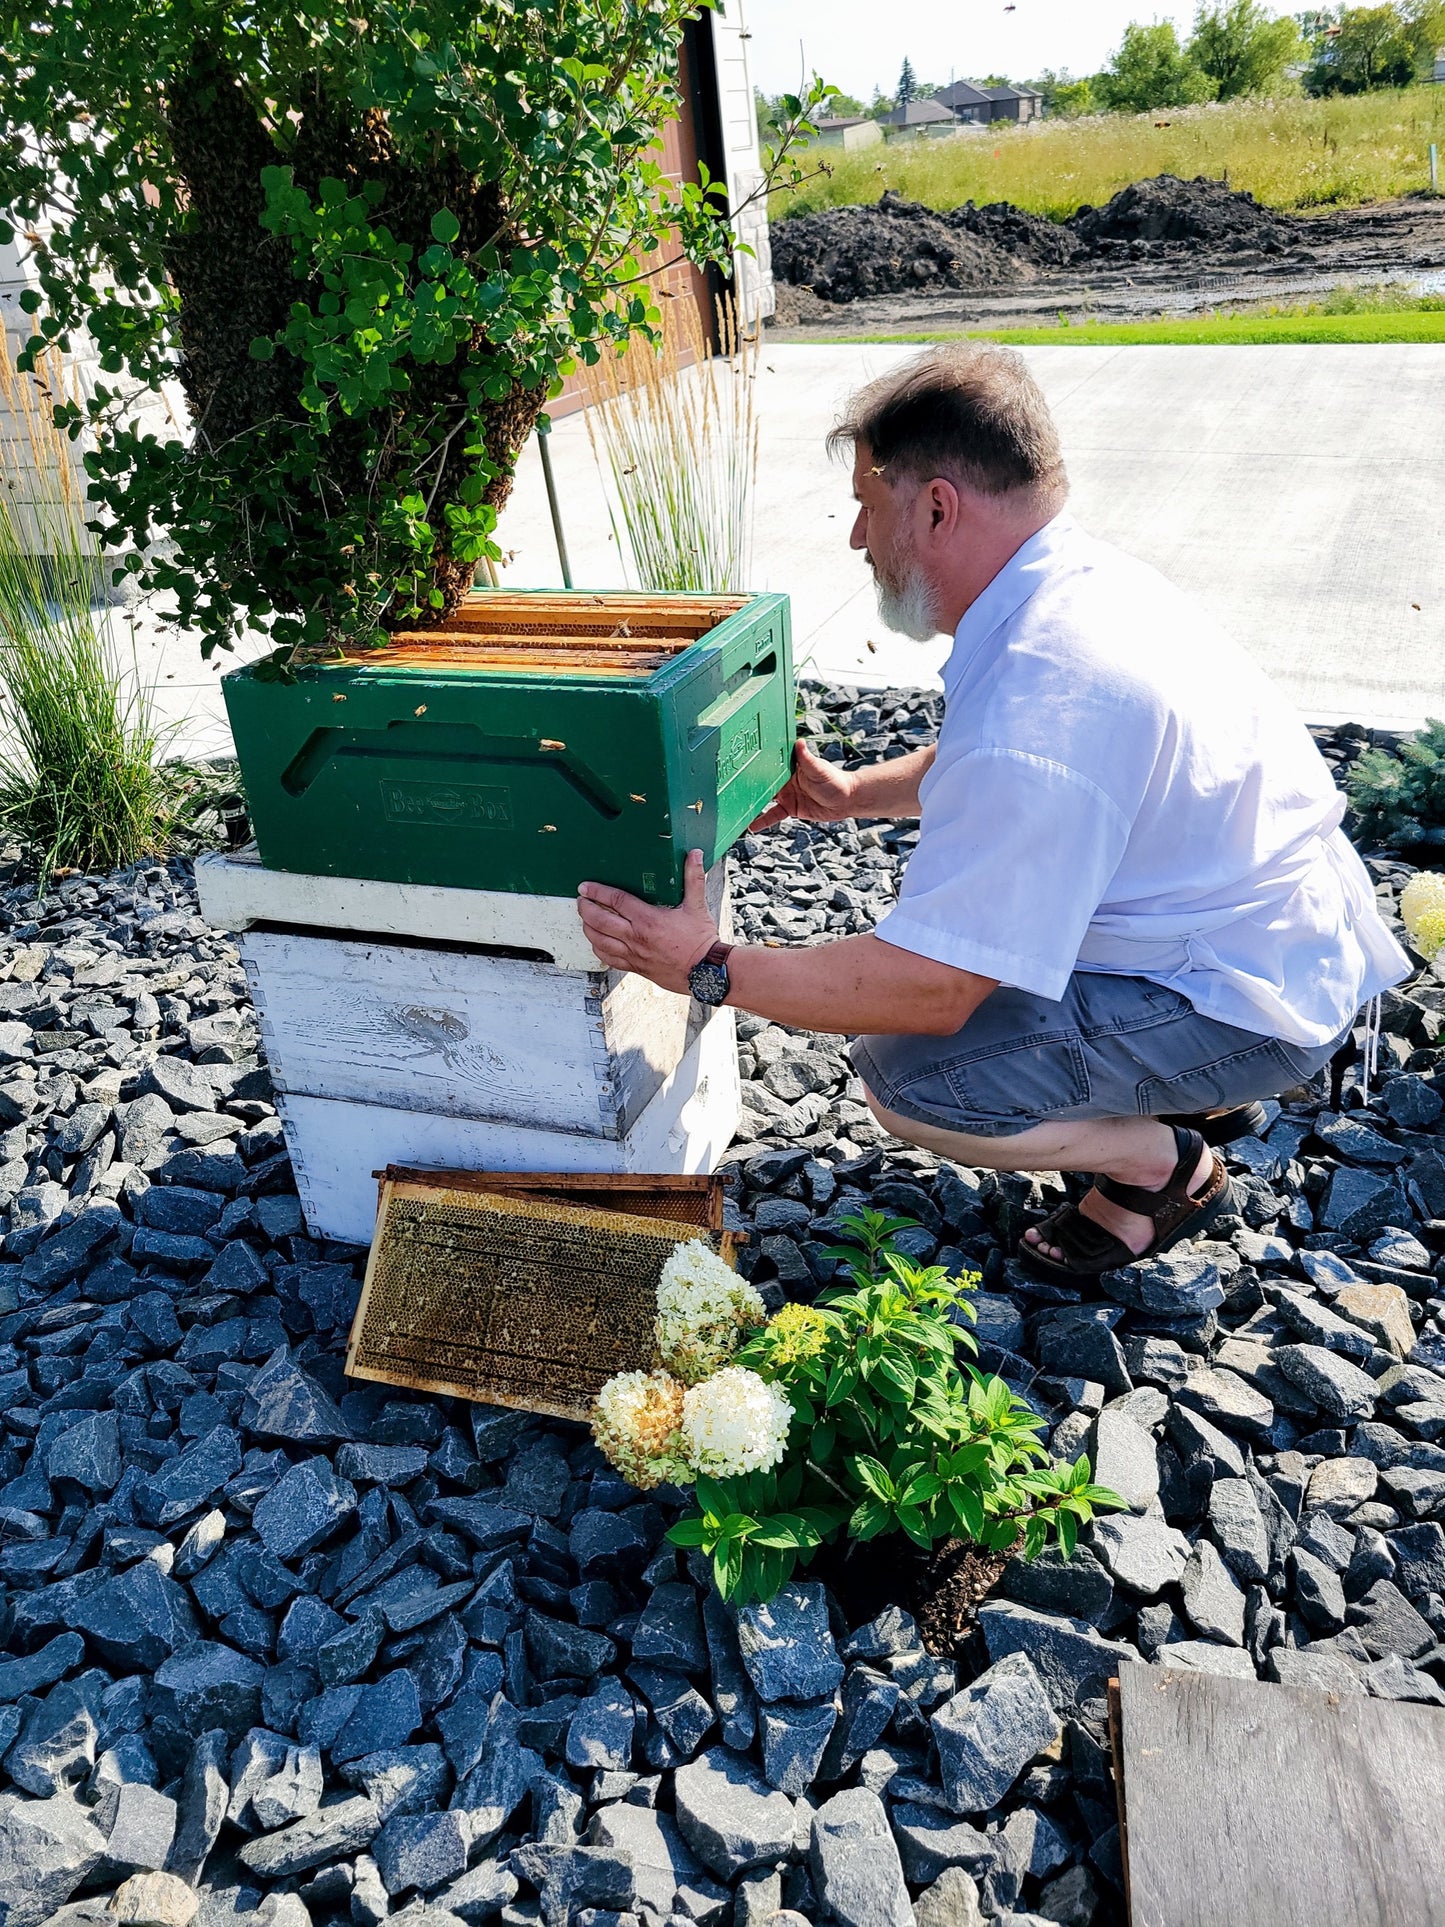 Beekeeper with hive boxes.